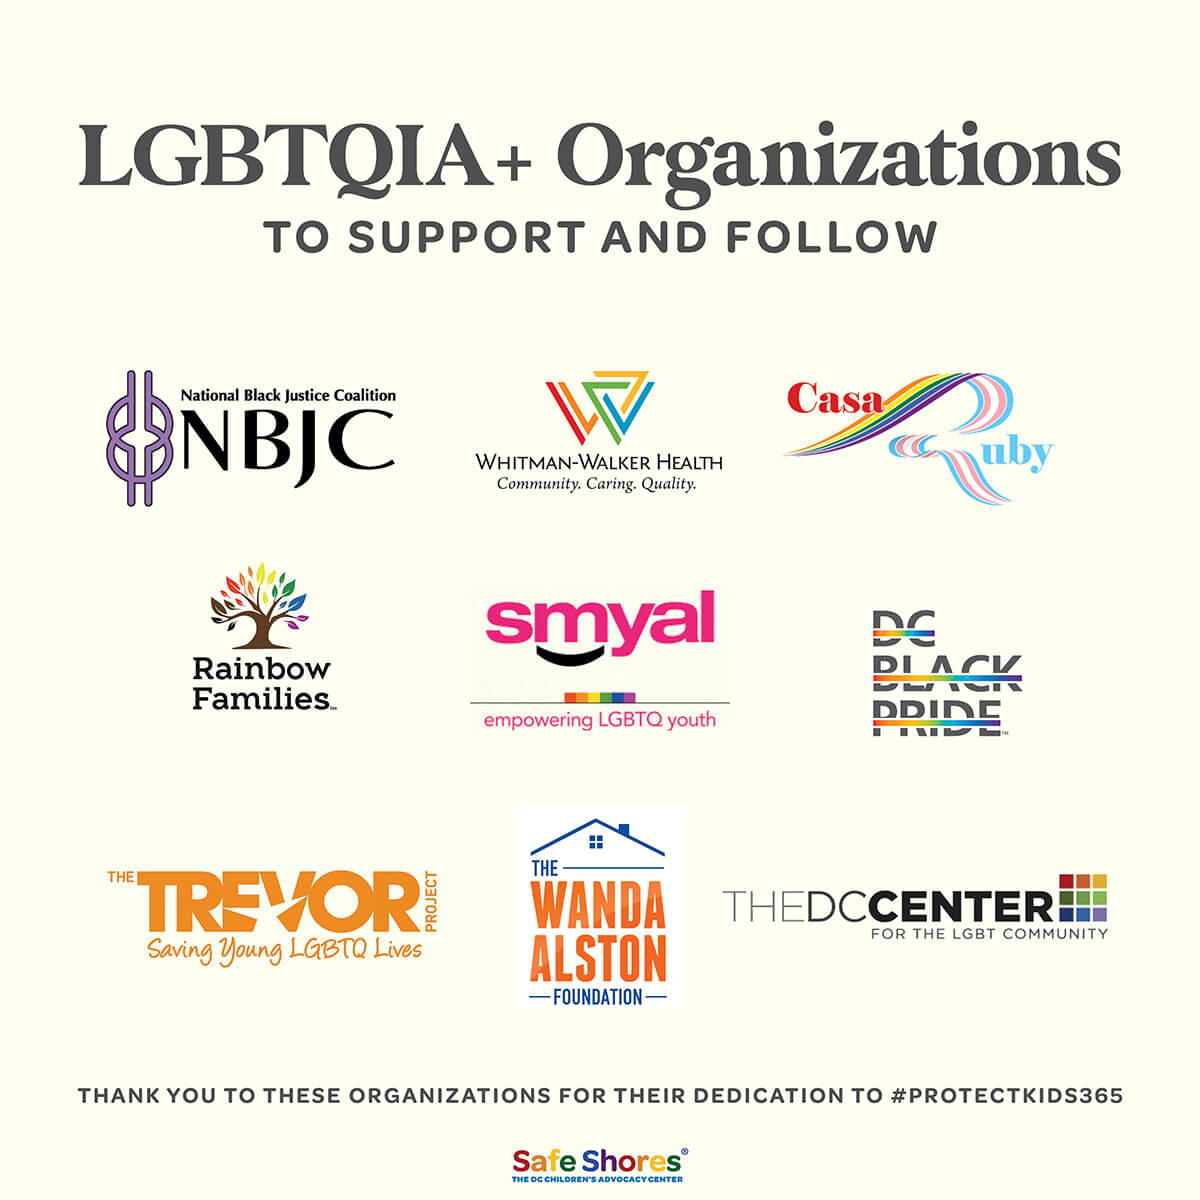 Image reads “LGBTQIA+ Organizations to Support and Follow” with 9 organizations listed. The organizations are as follows: National Black Justice Center Whitman-Walker Health Casa Ruby Rainbow Families SMYAL DC Black Pride The Trevor Project The Wanda Alston Foundation The DC Center for LGBT People